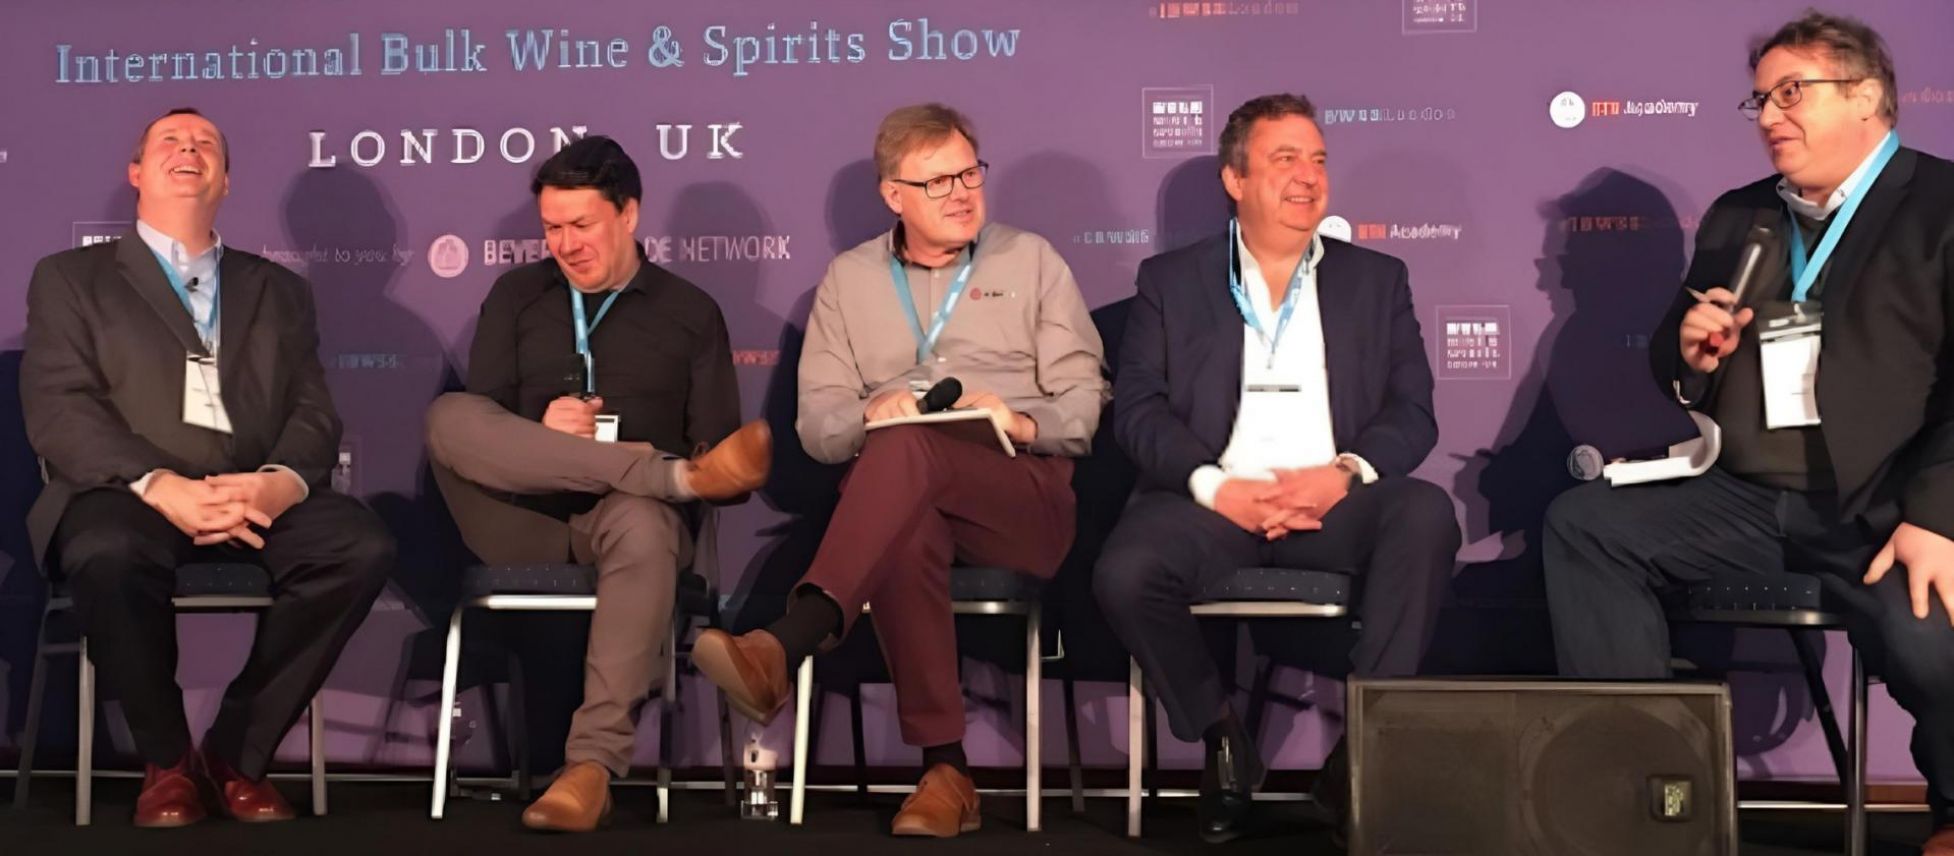 Photo for: Here’s Who’s Speaking At The 2023 IBWSS London: November 15-16, 2023